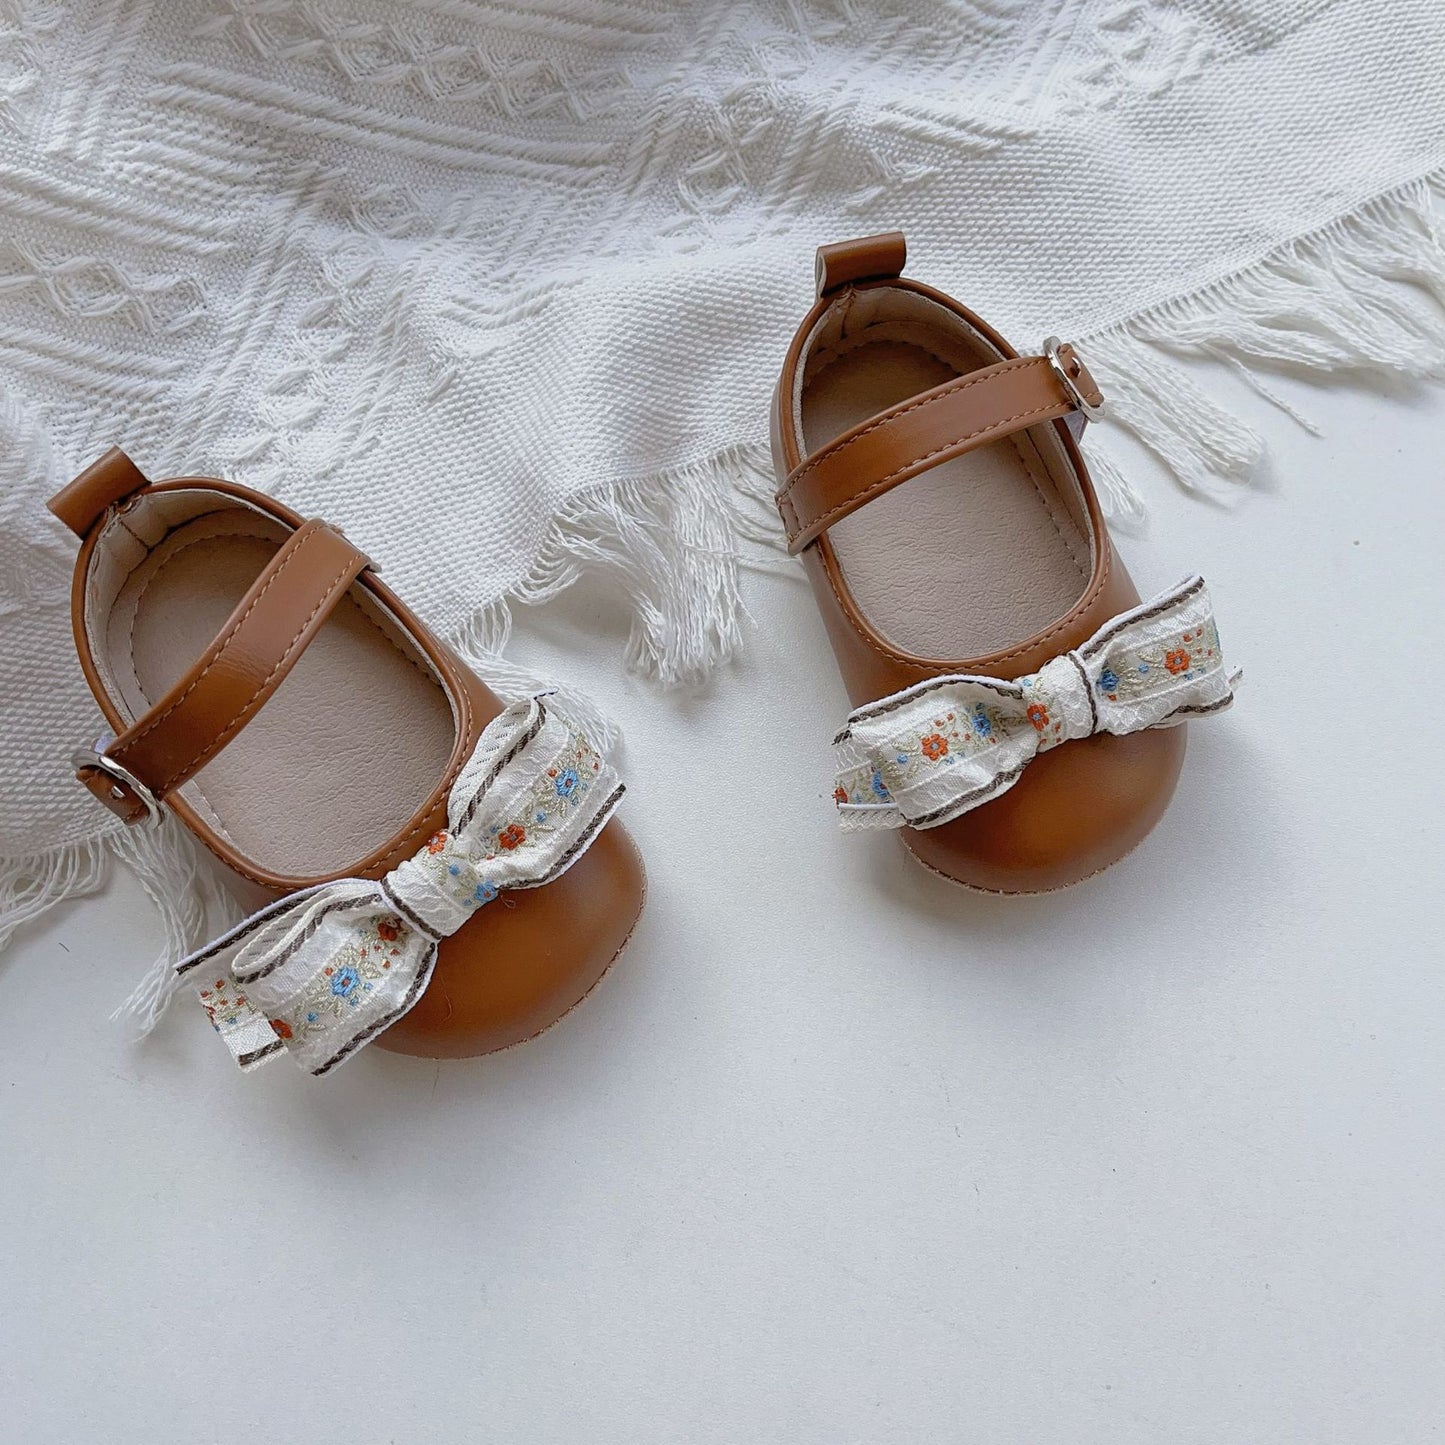 New Arrival Baby Girl Floral Embroidery Bow Toddler Soft-Sole Anti-Slip Walking Shoes